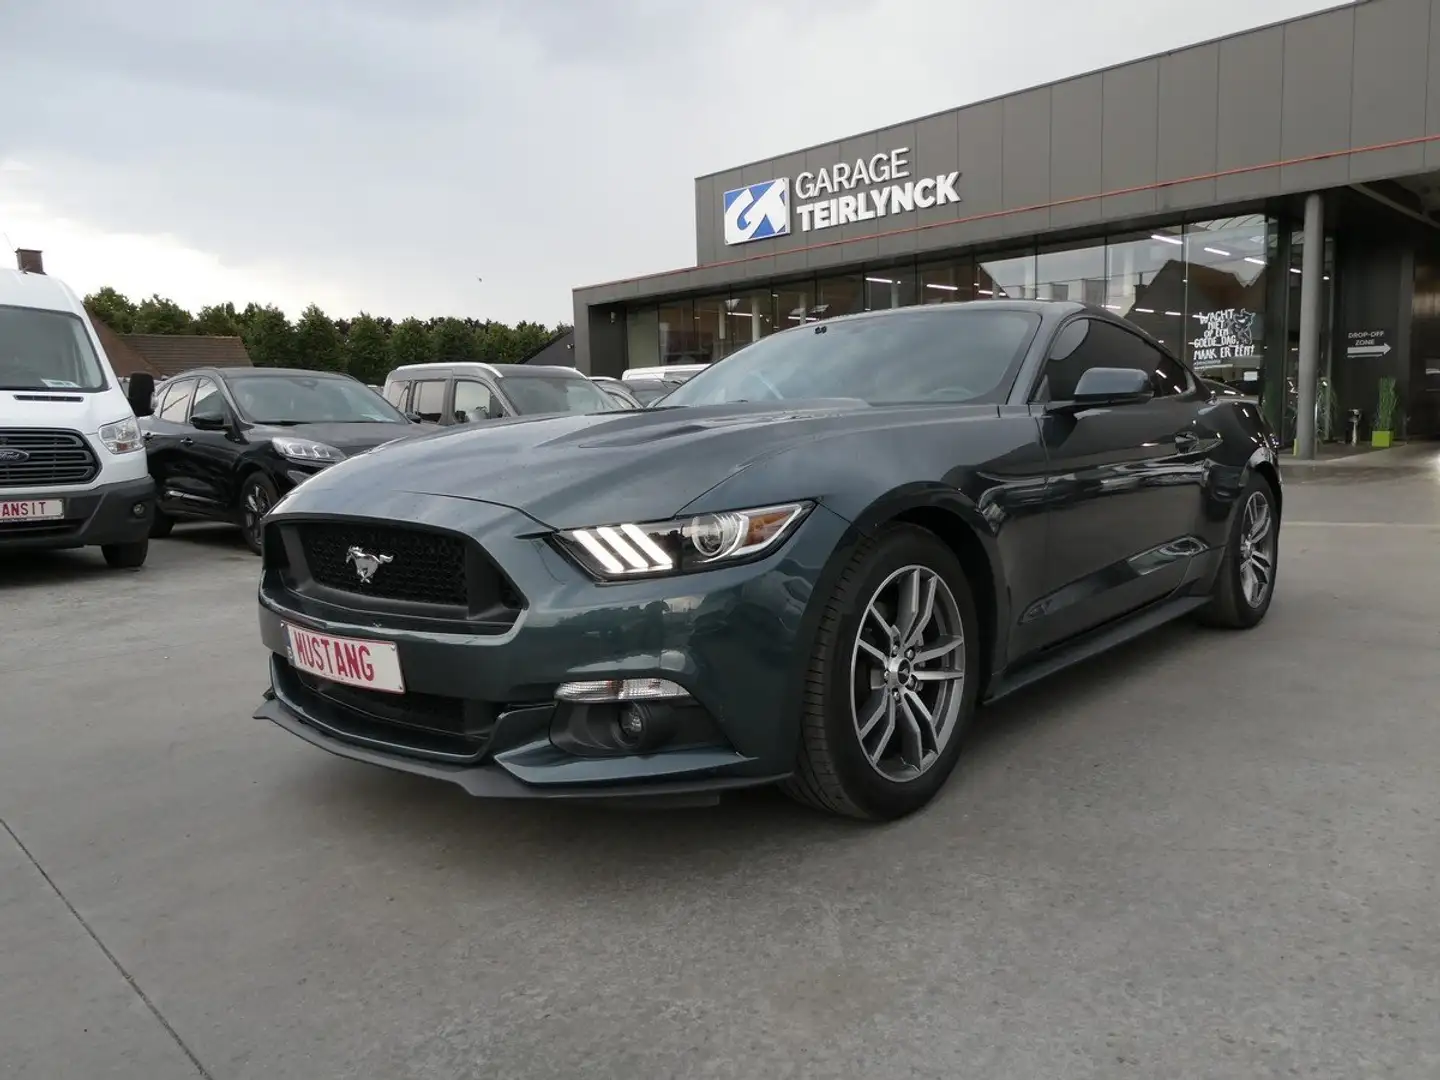 Ford Mustang Coupe Automaat 2.3 i 317pk '15 33000km (48593) Groen - 1